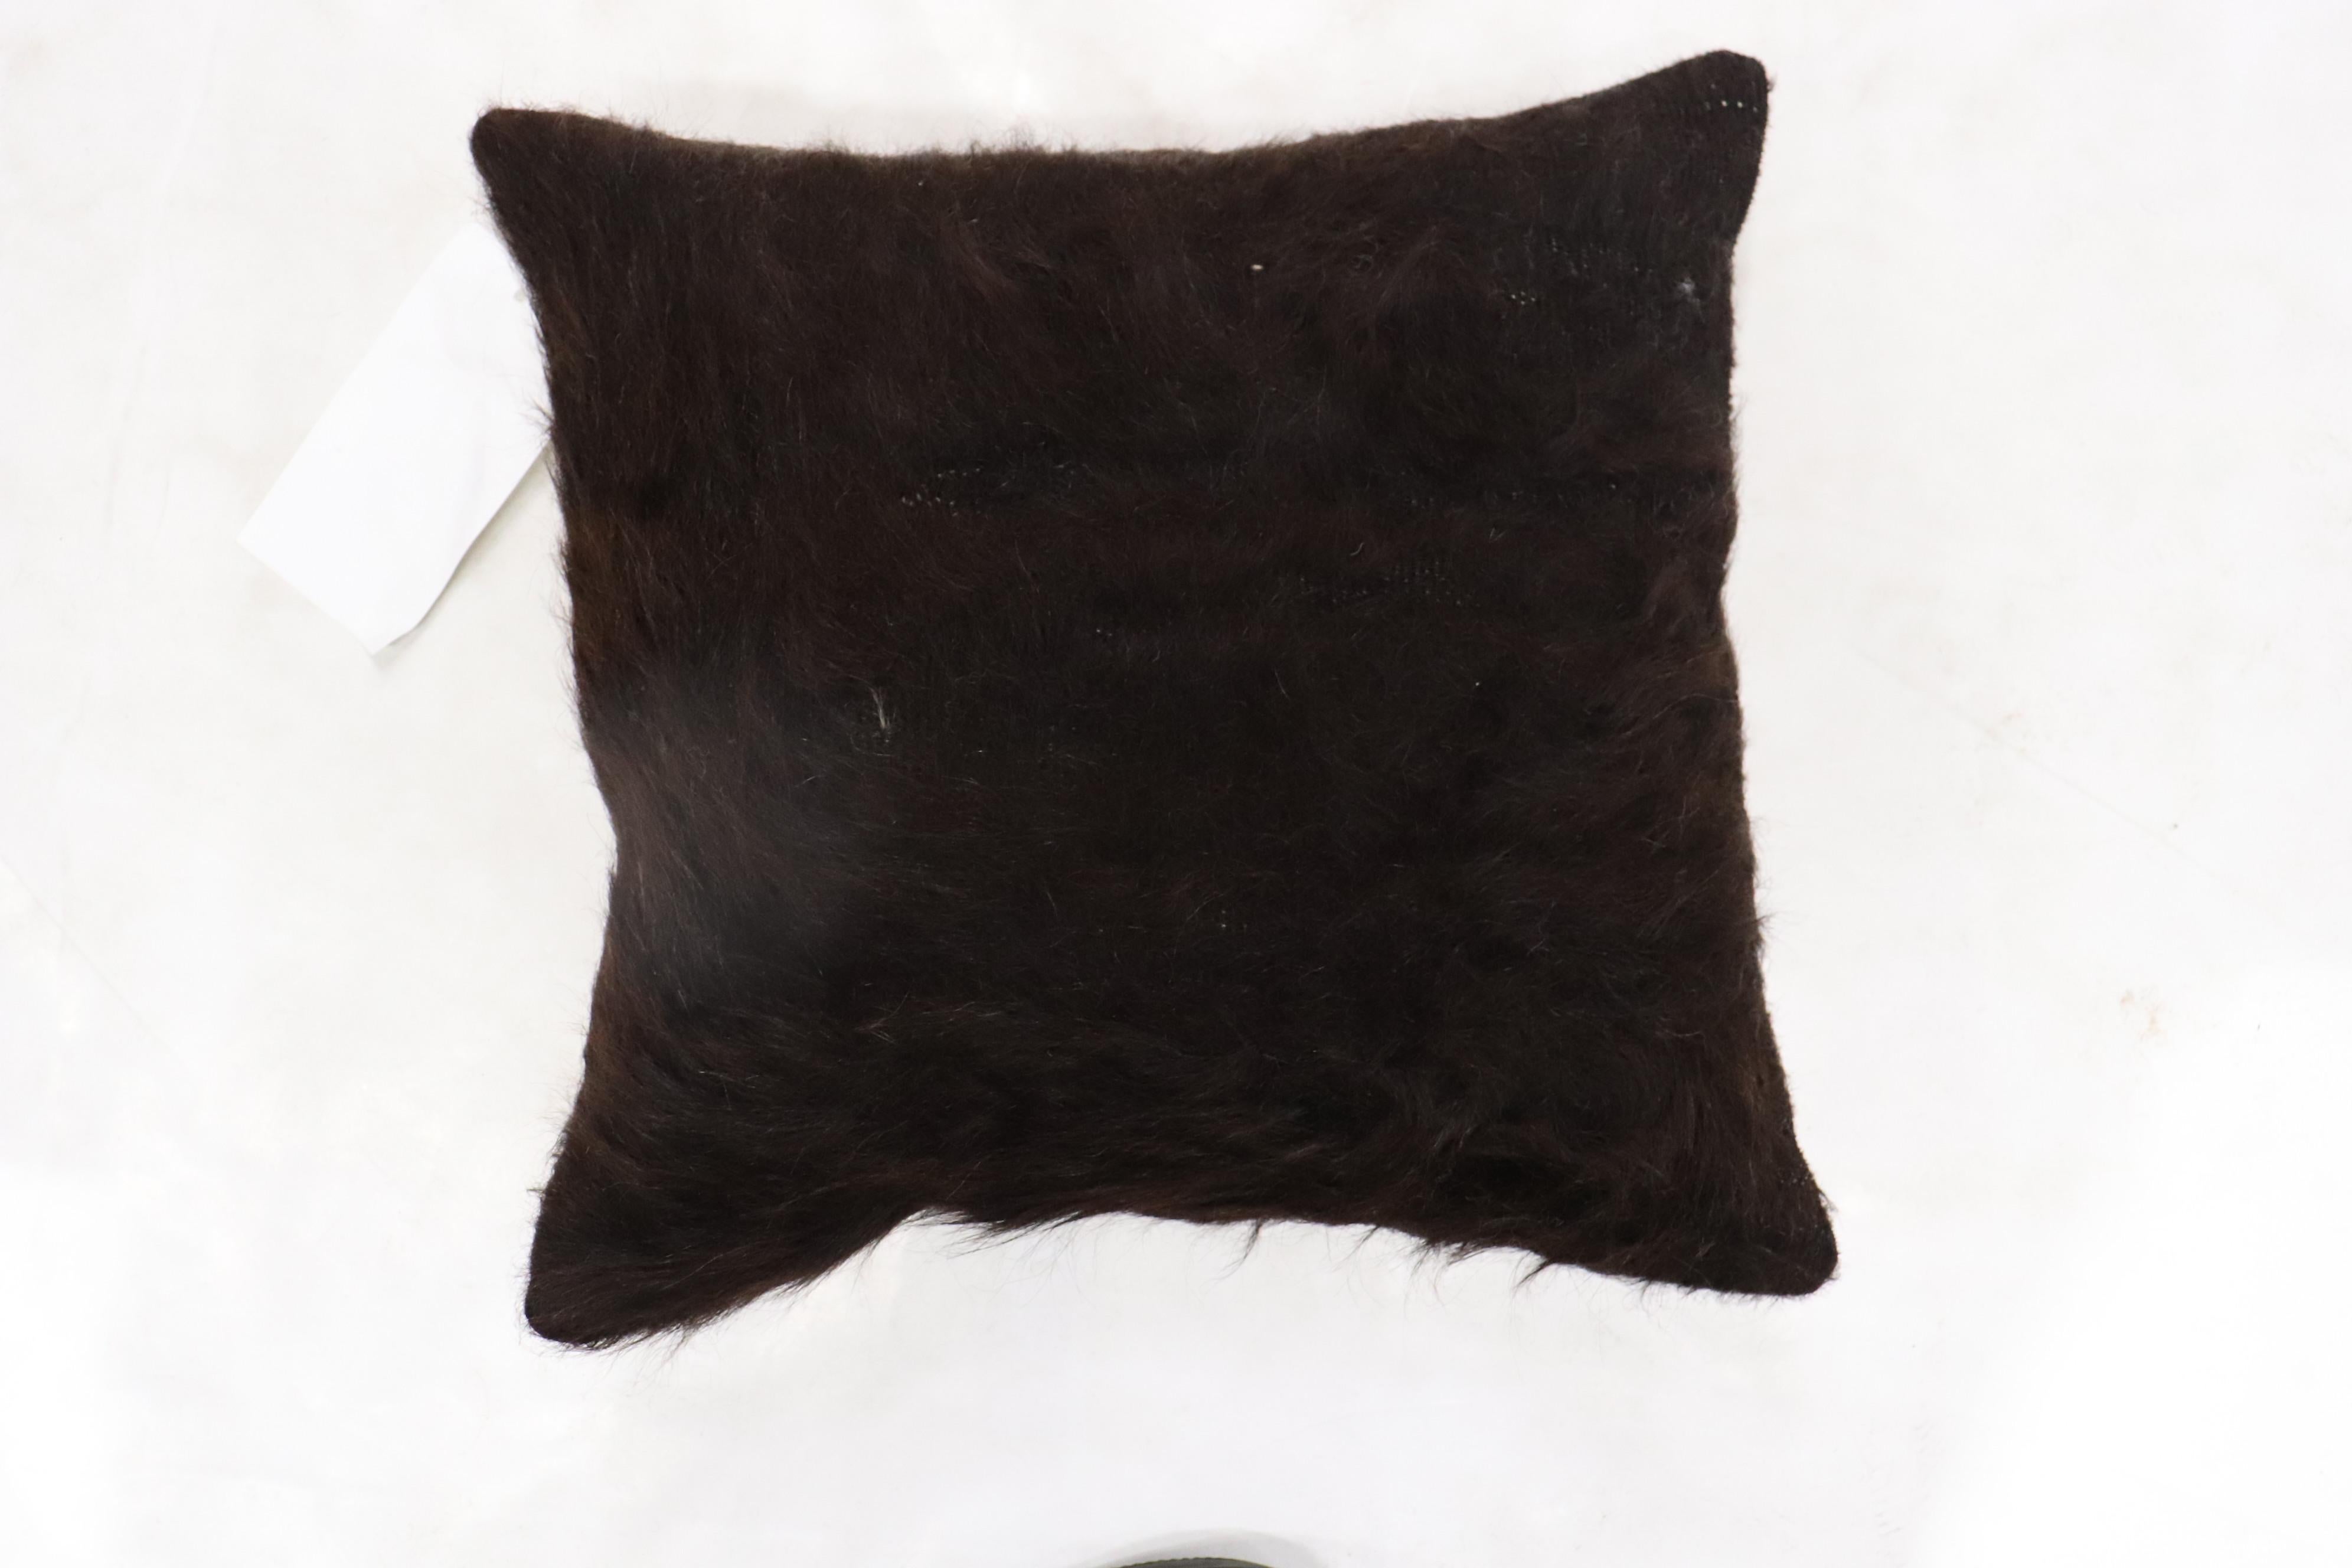 Pillow made from a vintage mohair rug in black. zipper closure and poly foam insert provided.
Measures: 16'' x 16''.